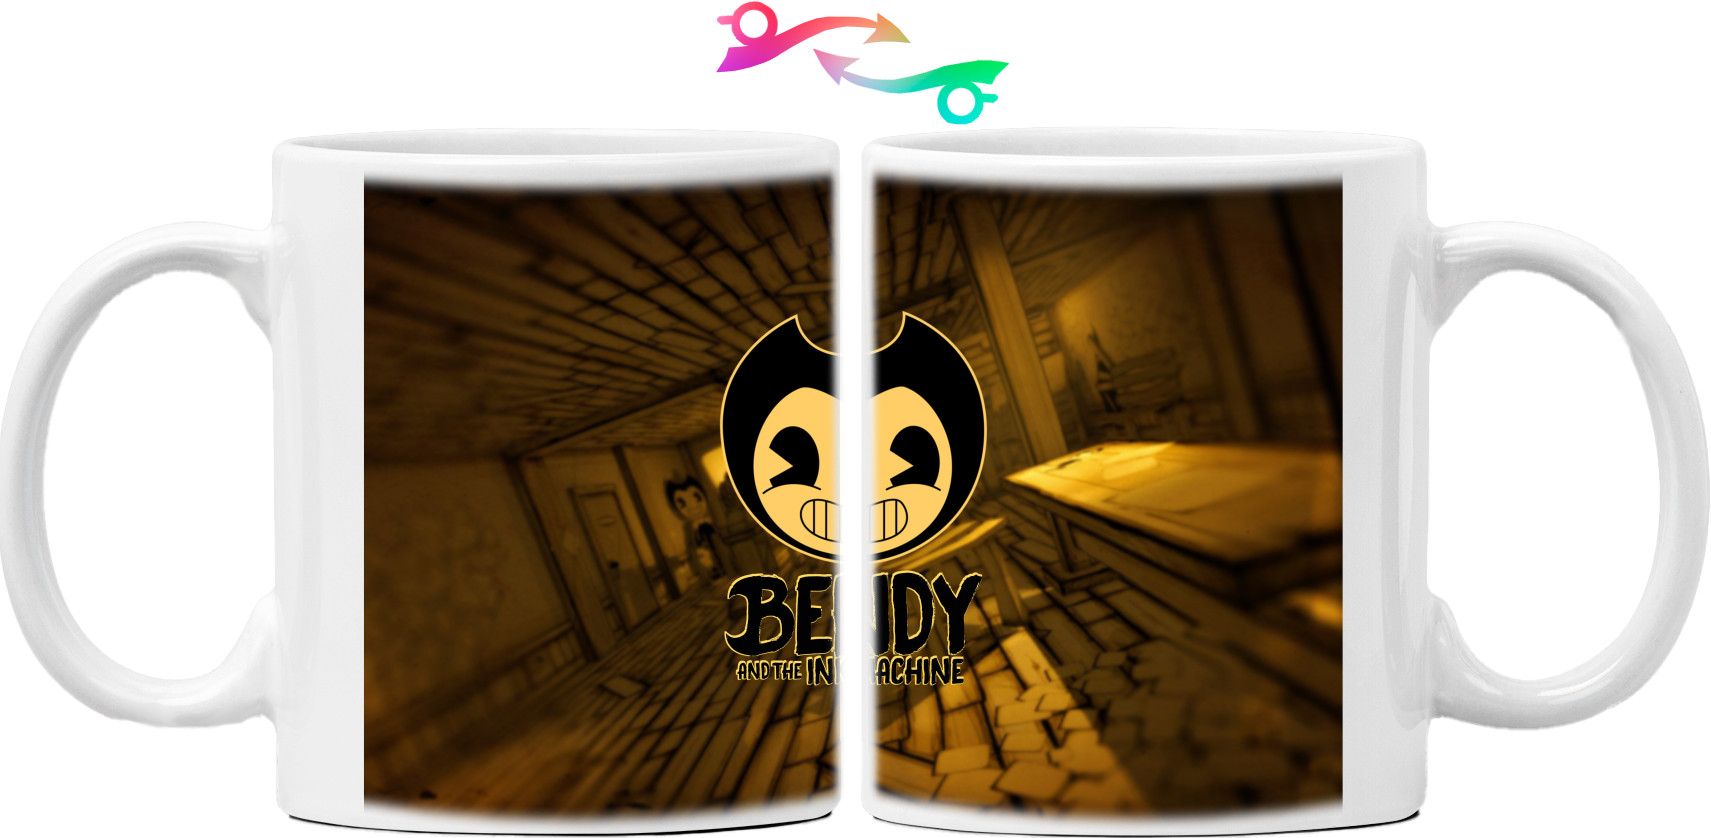 Bendy and the ink machine 3